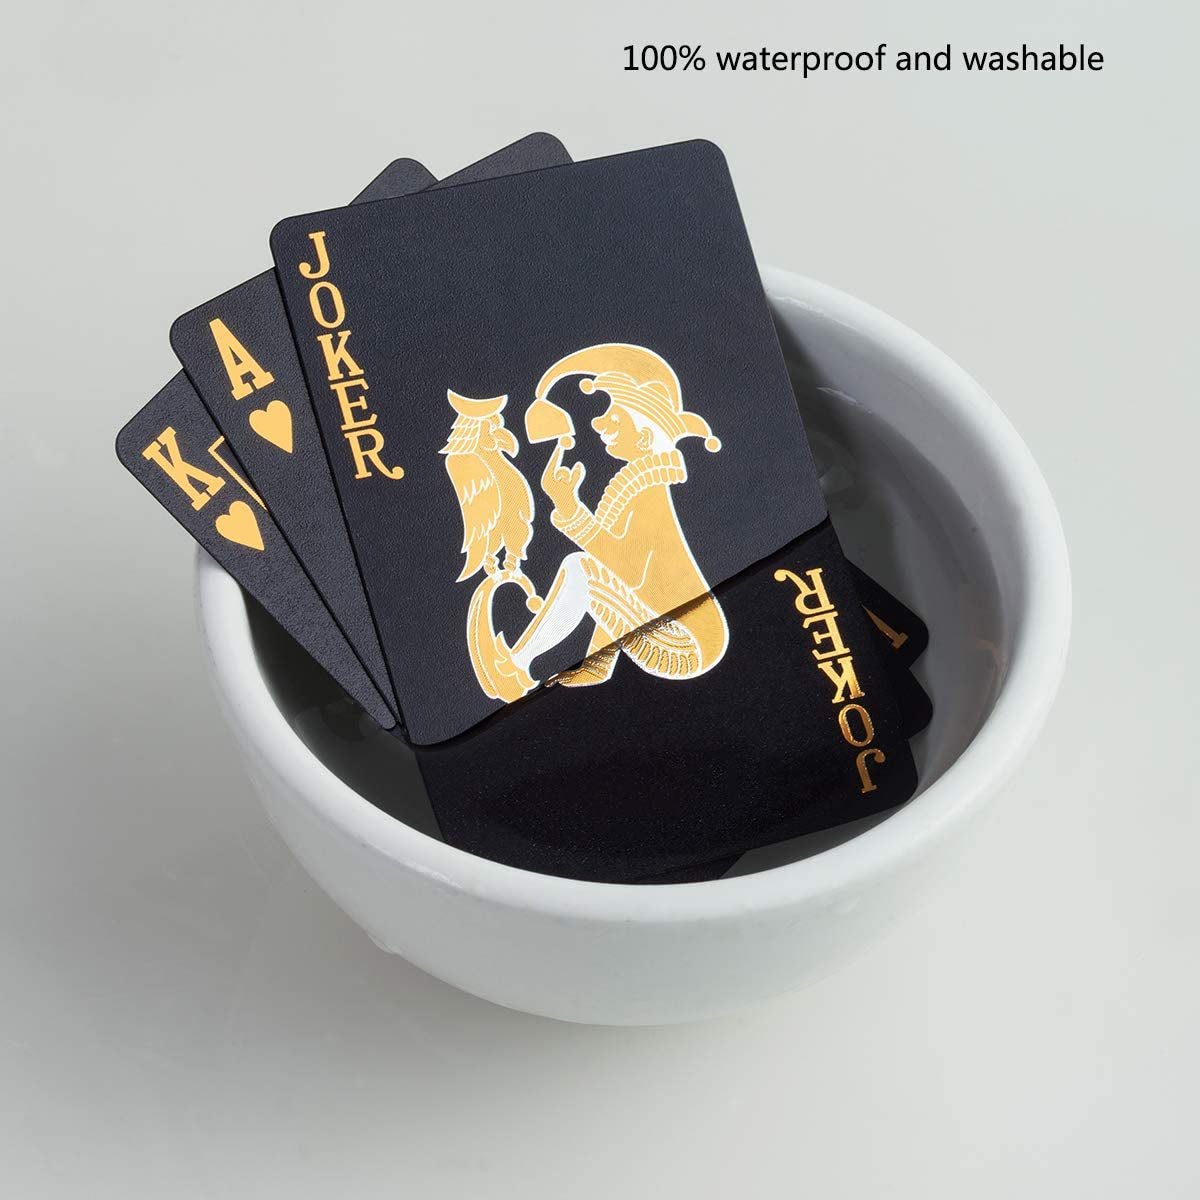 Waterproof Playing Cards, Plastic Playing Cards, Deck of Cards, Gift Poker Cards (Black Diamond Cards)